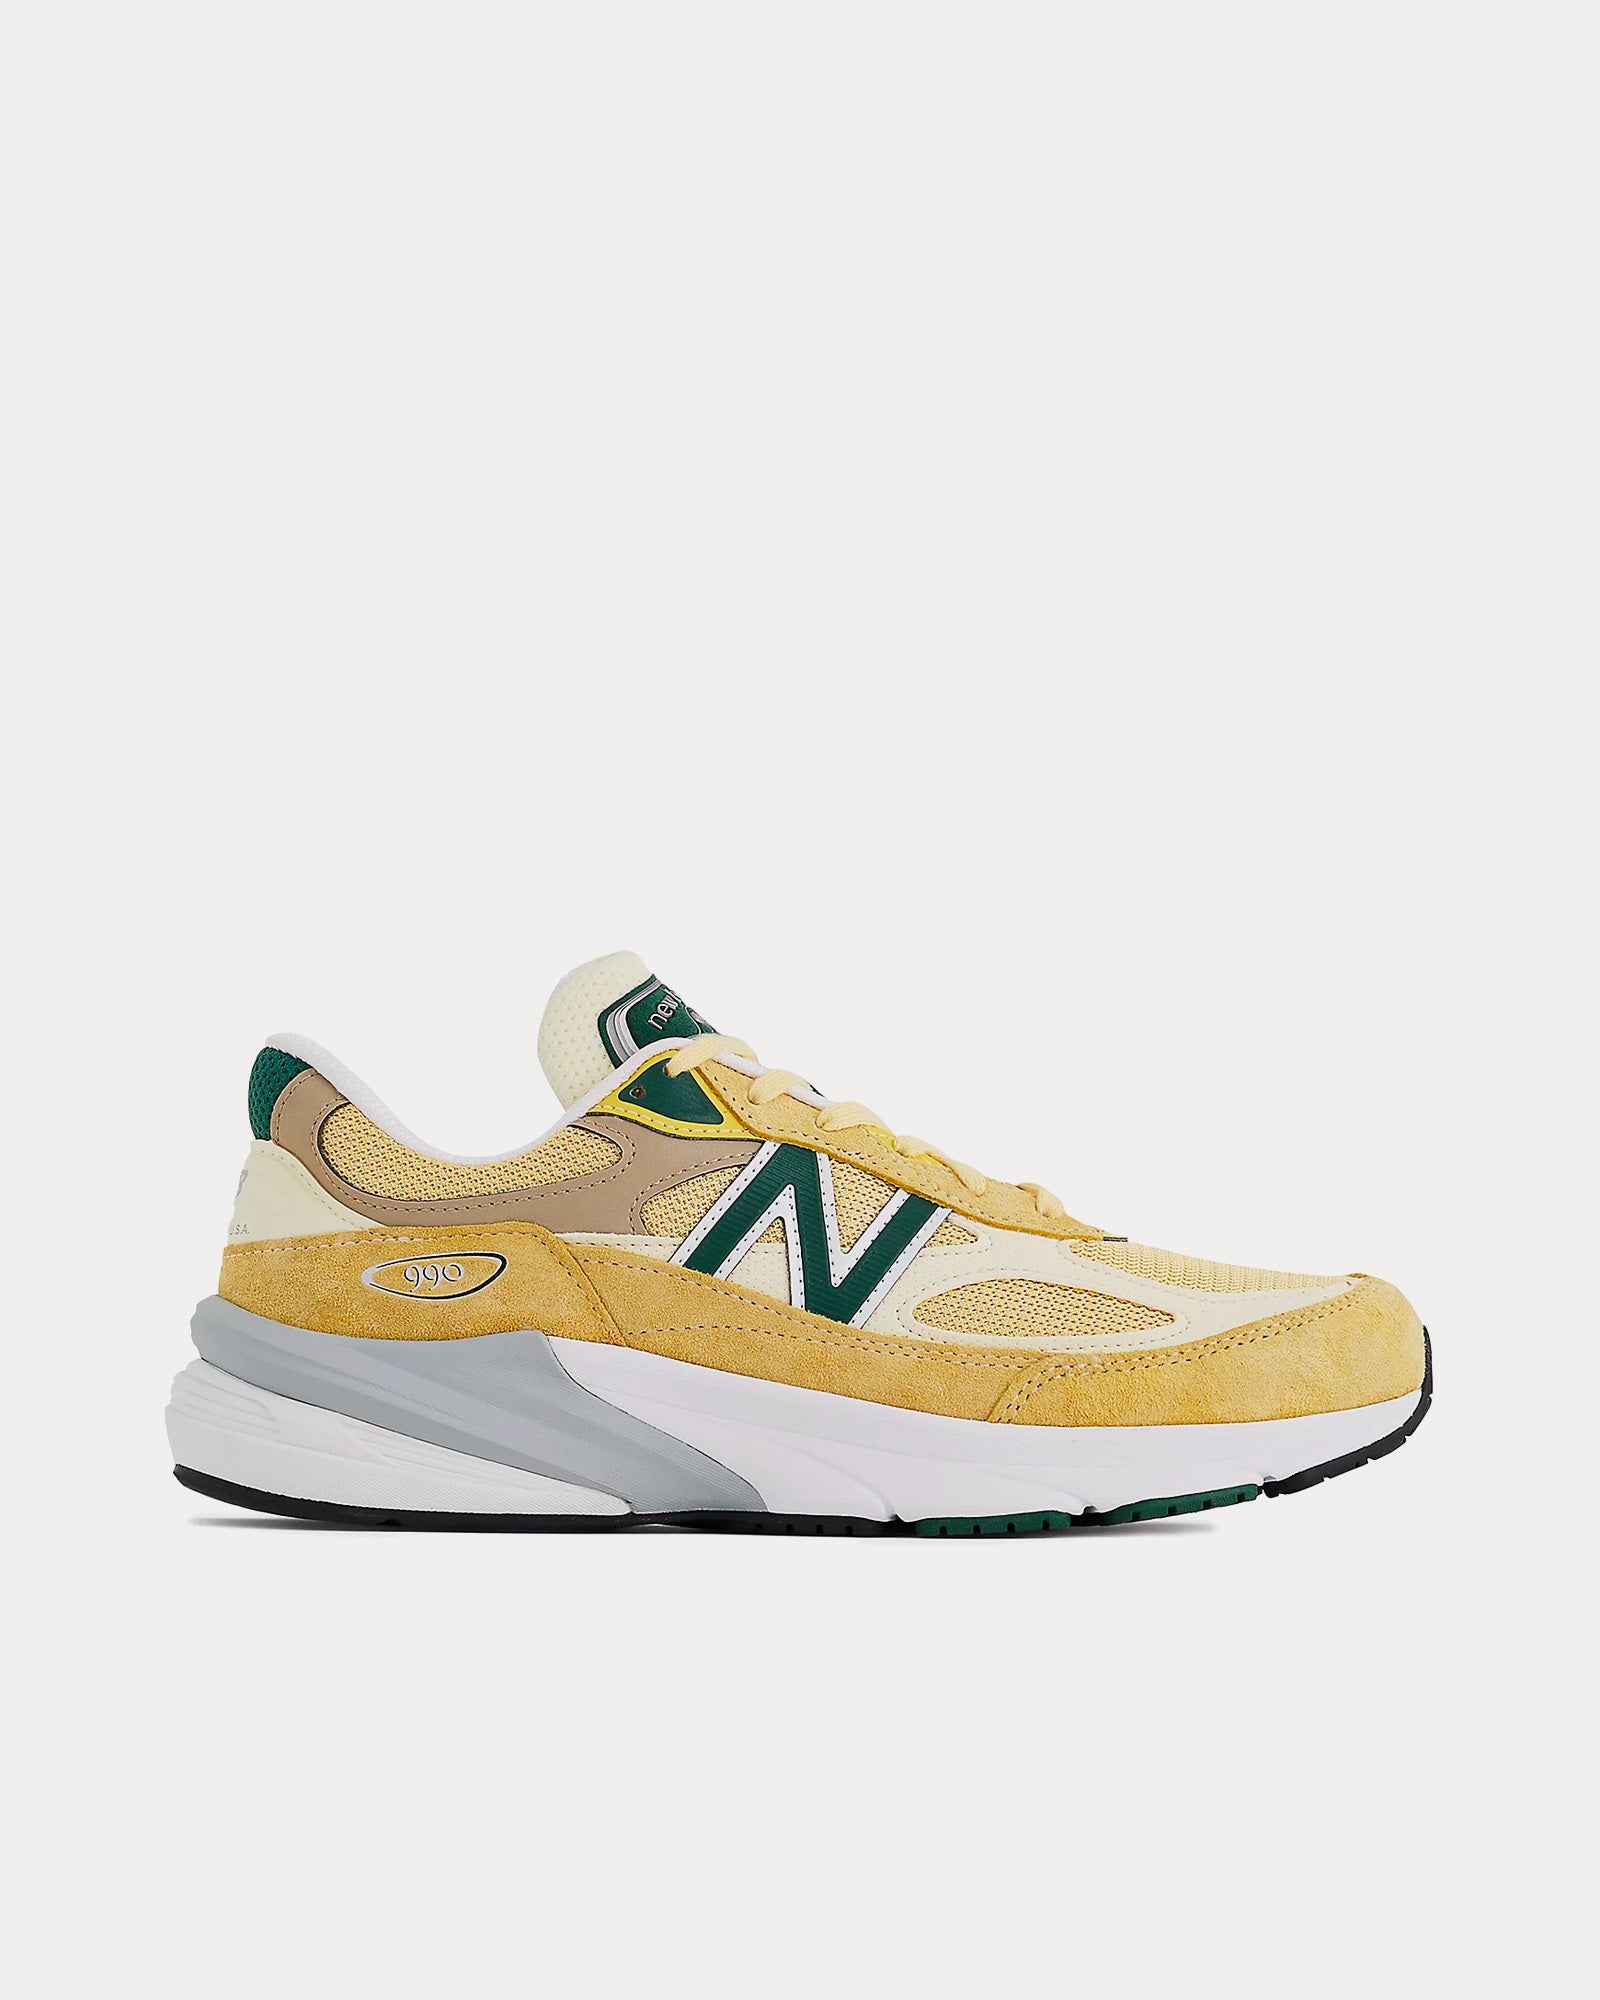 New Balance Made in USA 990v6 Sulphur / Green Low Top Sneakers